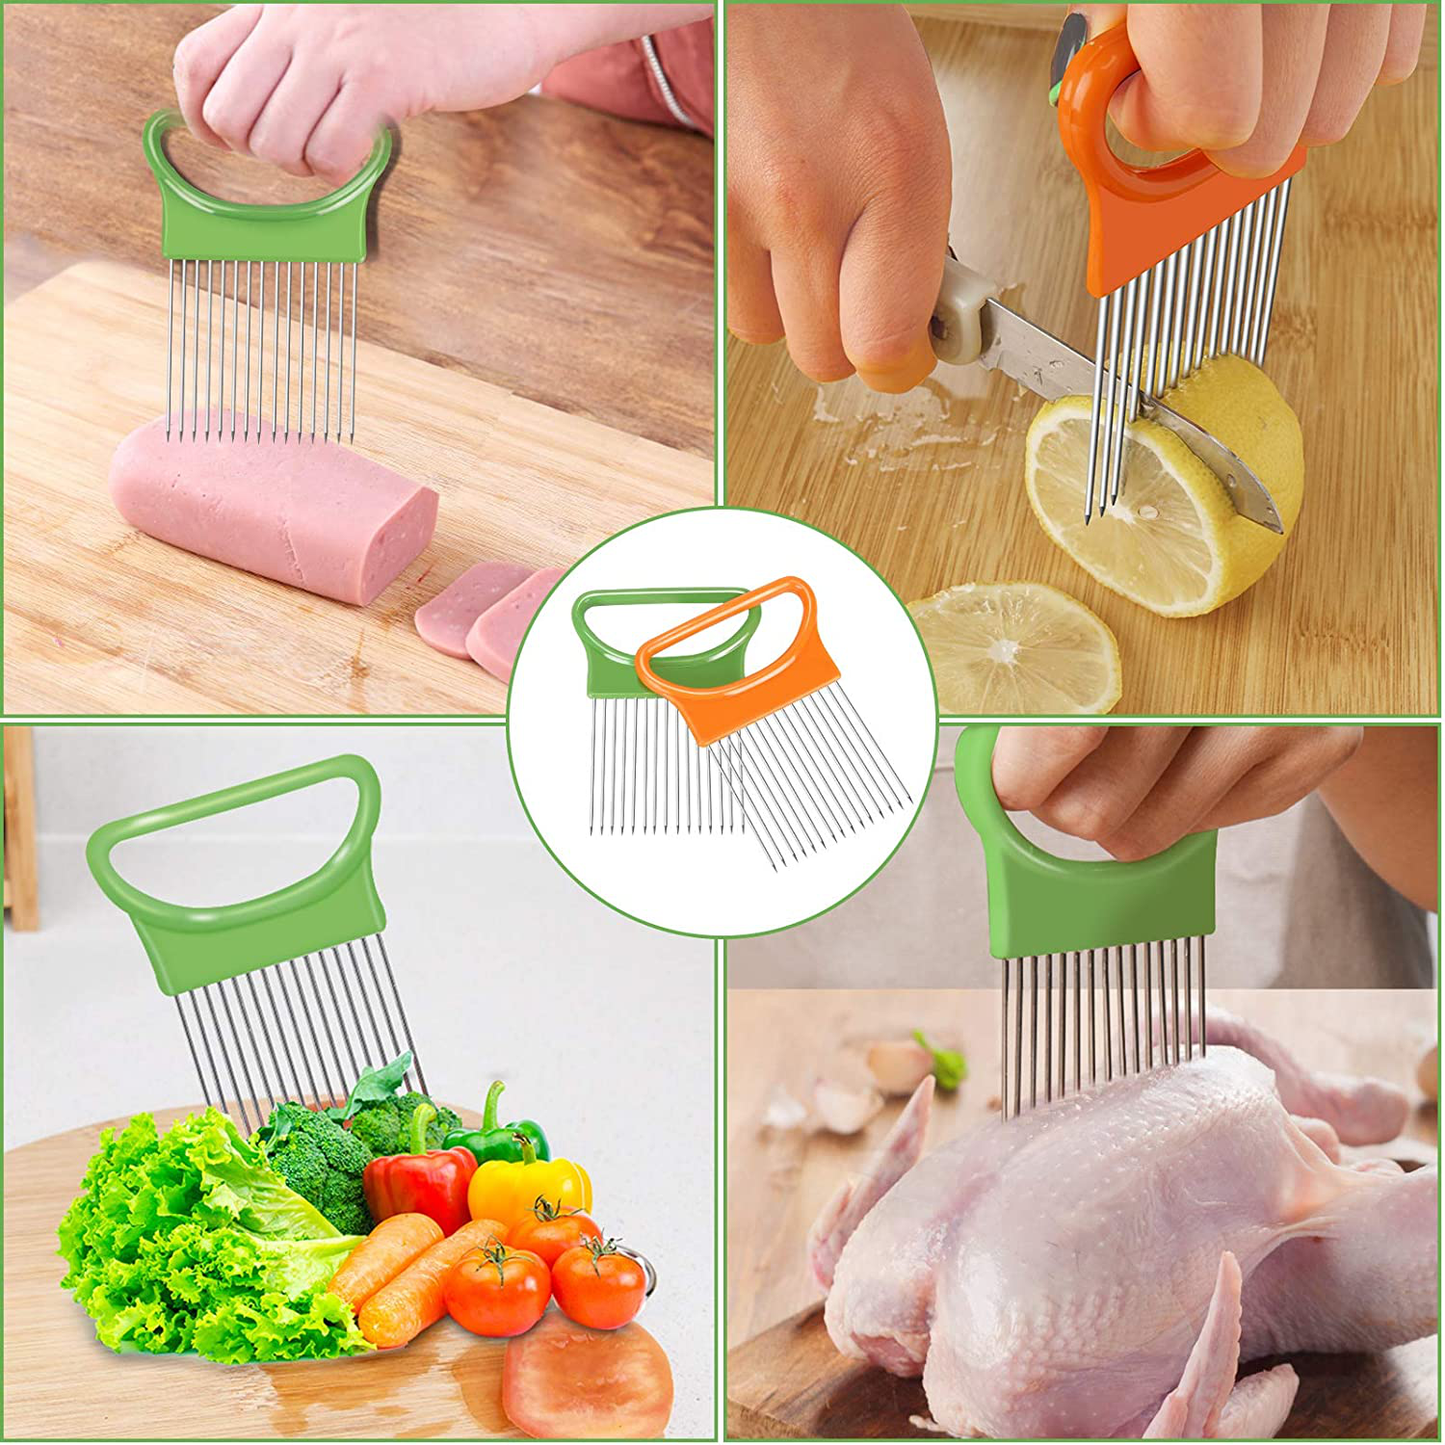 2Pcs Ruooson Onion Holder for Slicing, Stainless Steel Prongs Kitchen Slicer, Lemon Cucumber Cutter Comb,Meat Tenderizer,Green and Orange (Orange)